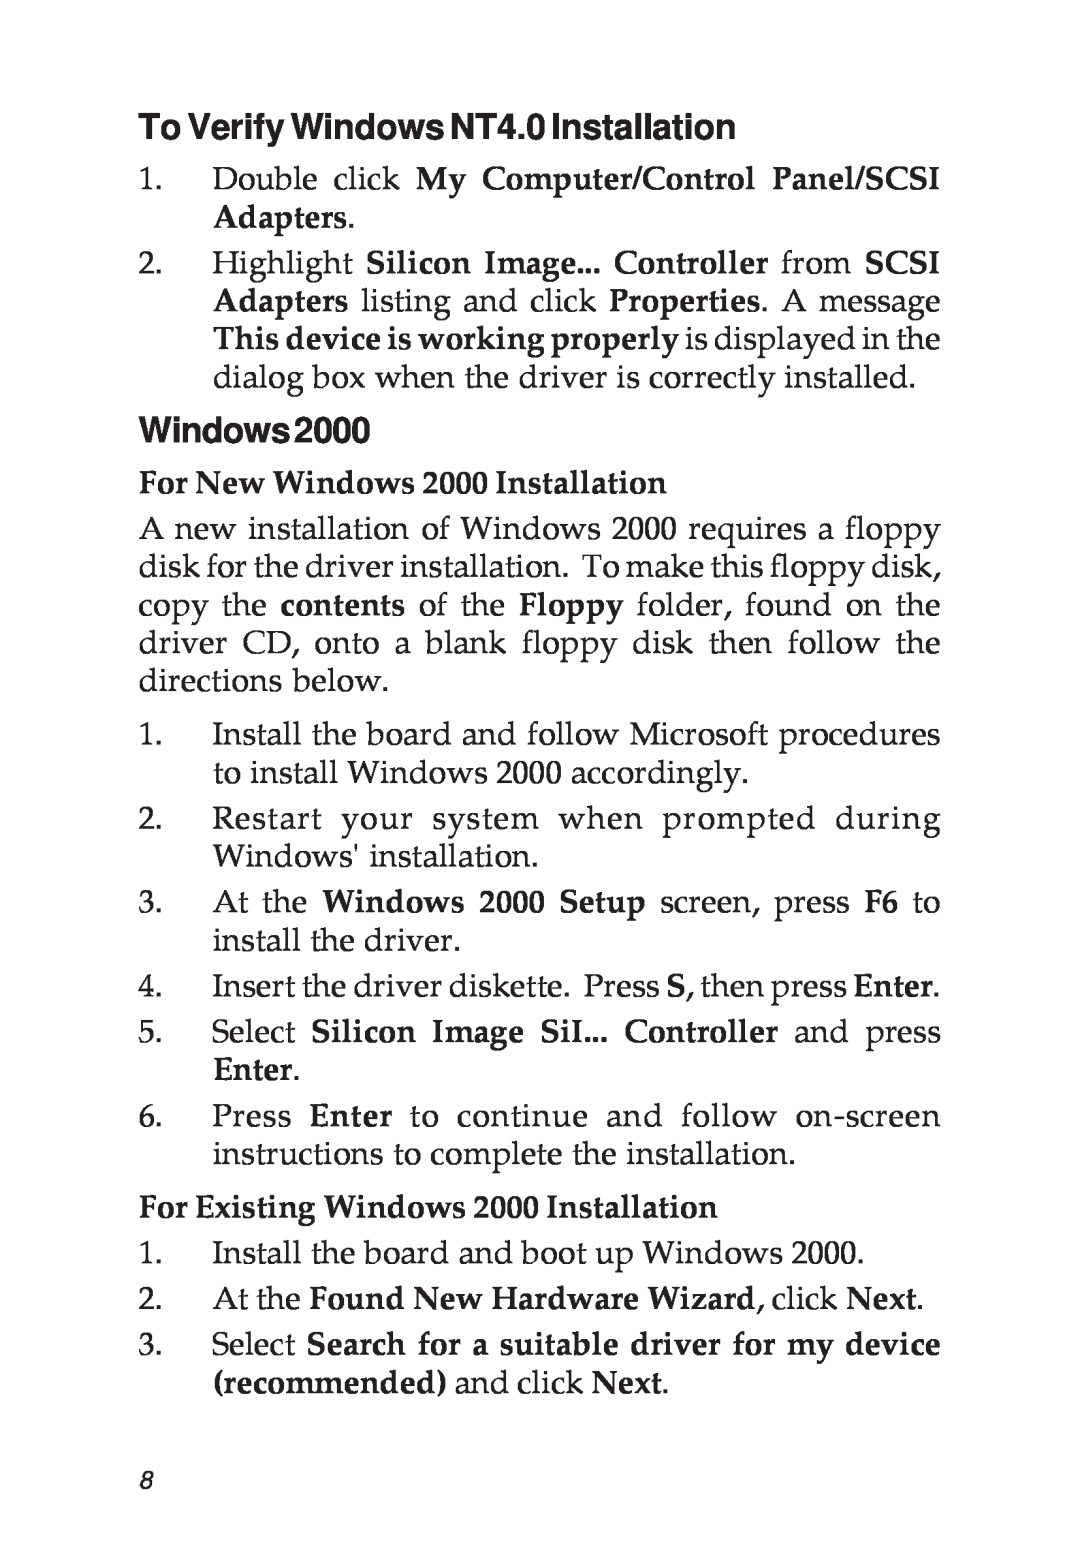 SIIG 04-0265F specifications To Verify Windows NT4.0 Installation, Windows2000 